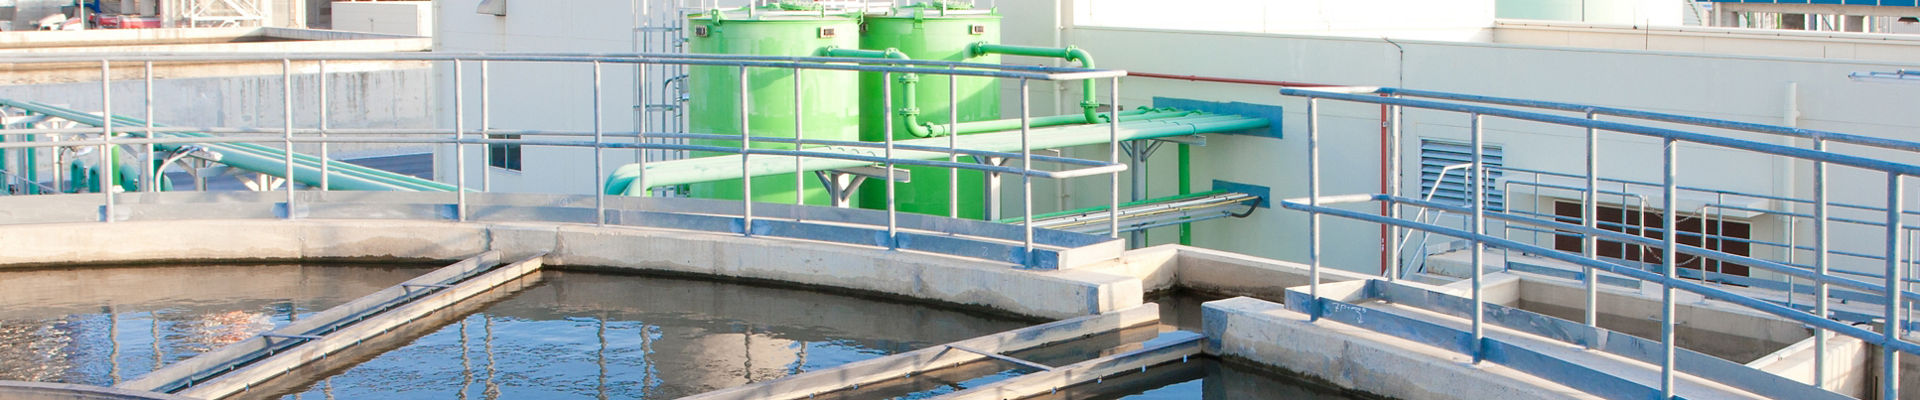 Treatment tanks in wastewater treatment systems